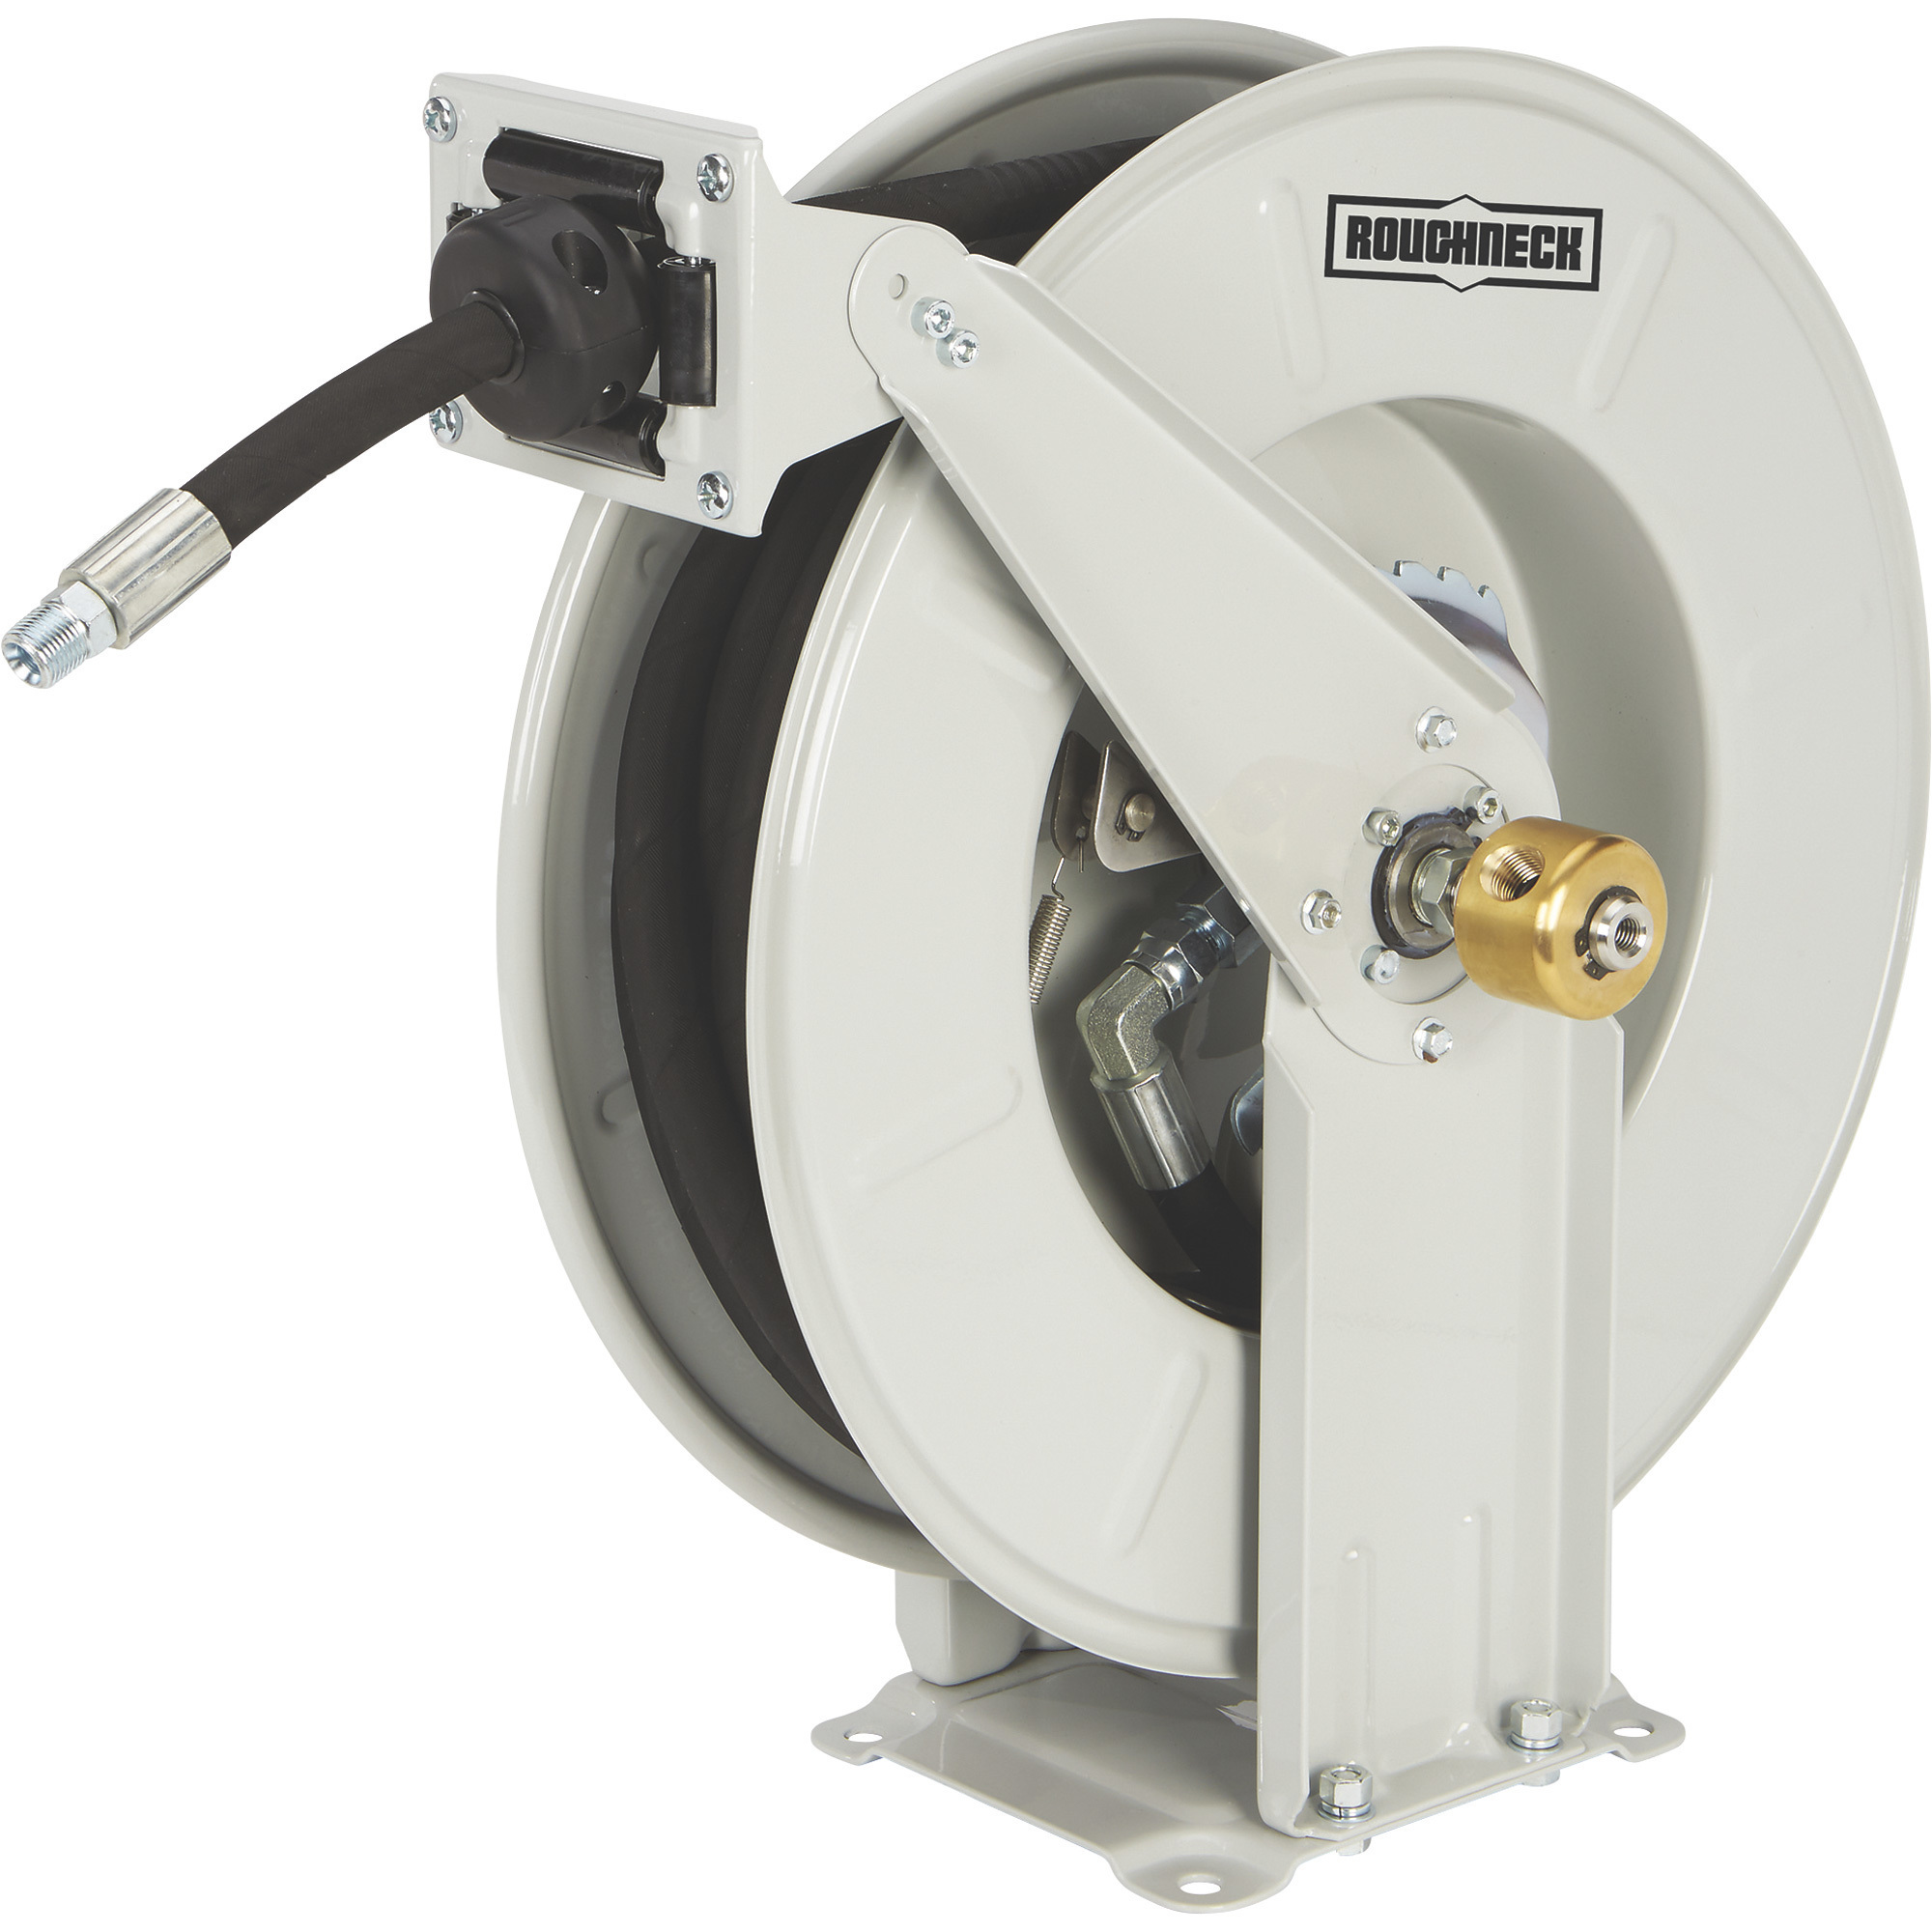 Roughneck Heavy-Duty Grease Hose Reel with 3/8Inch x 50ft. Hose